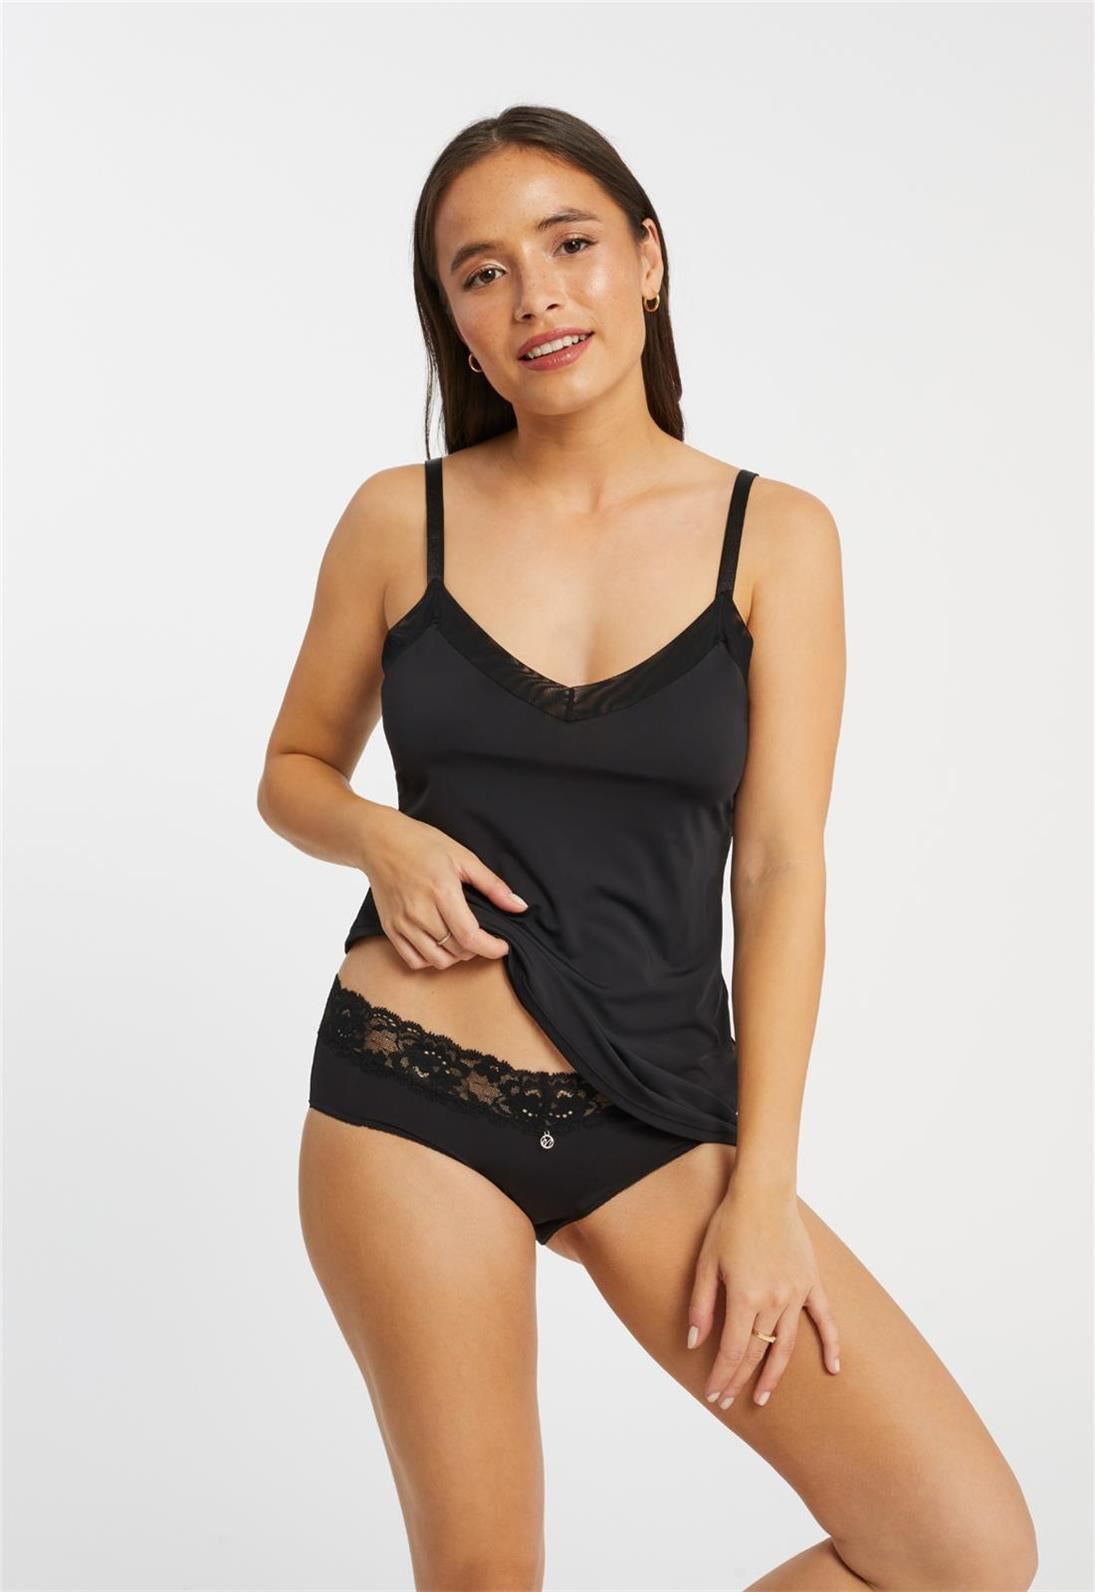 Camisole Slip - Black worn by model front view